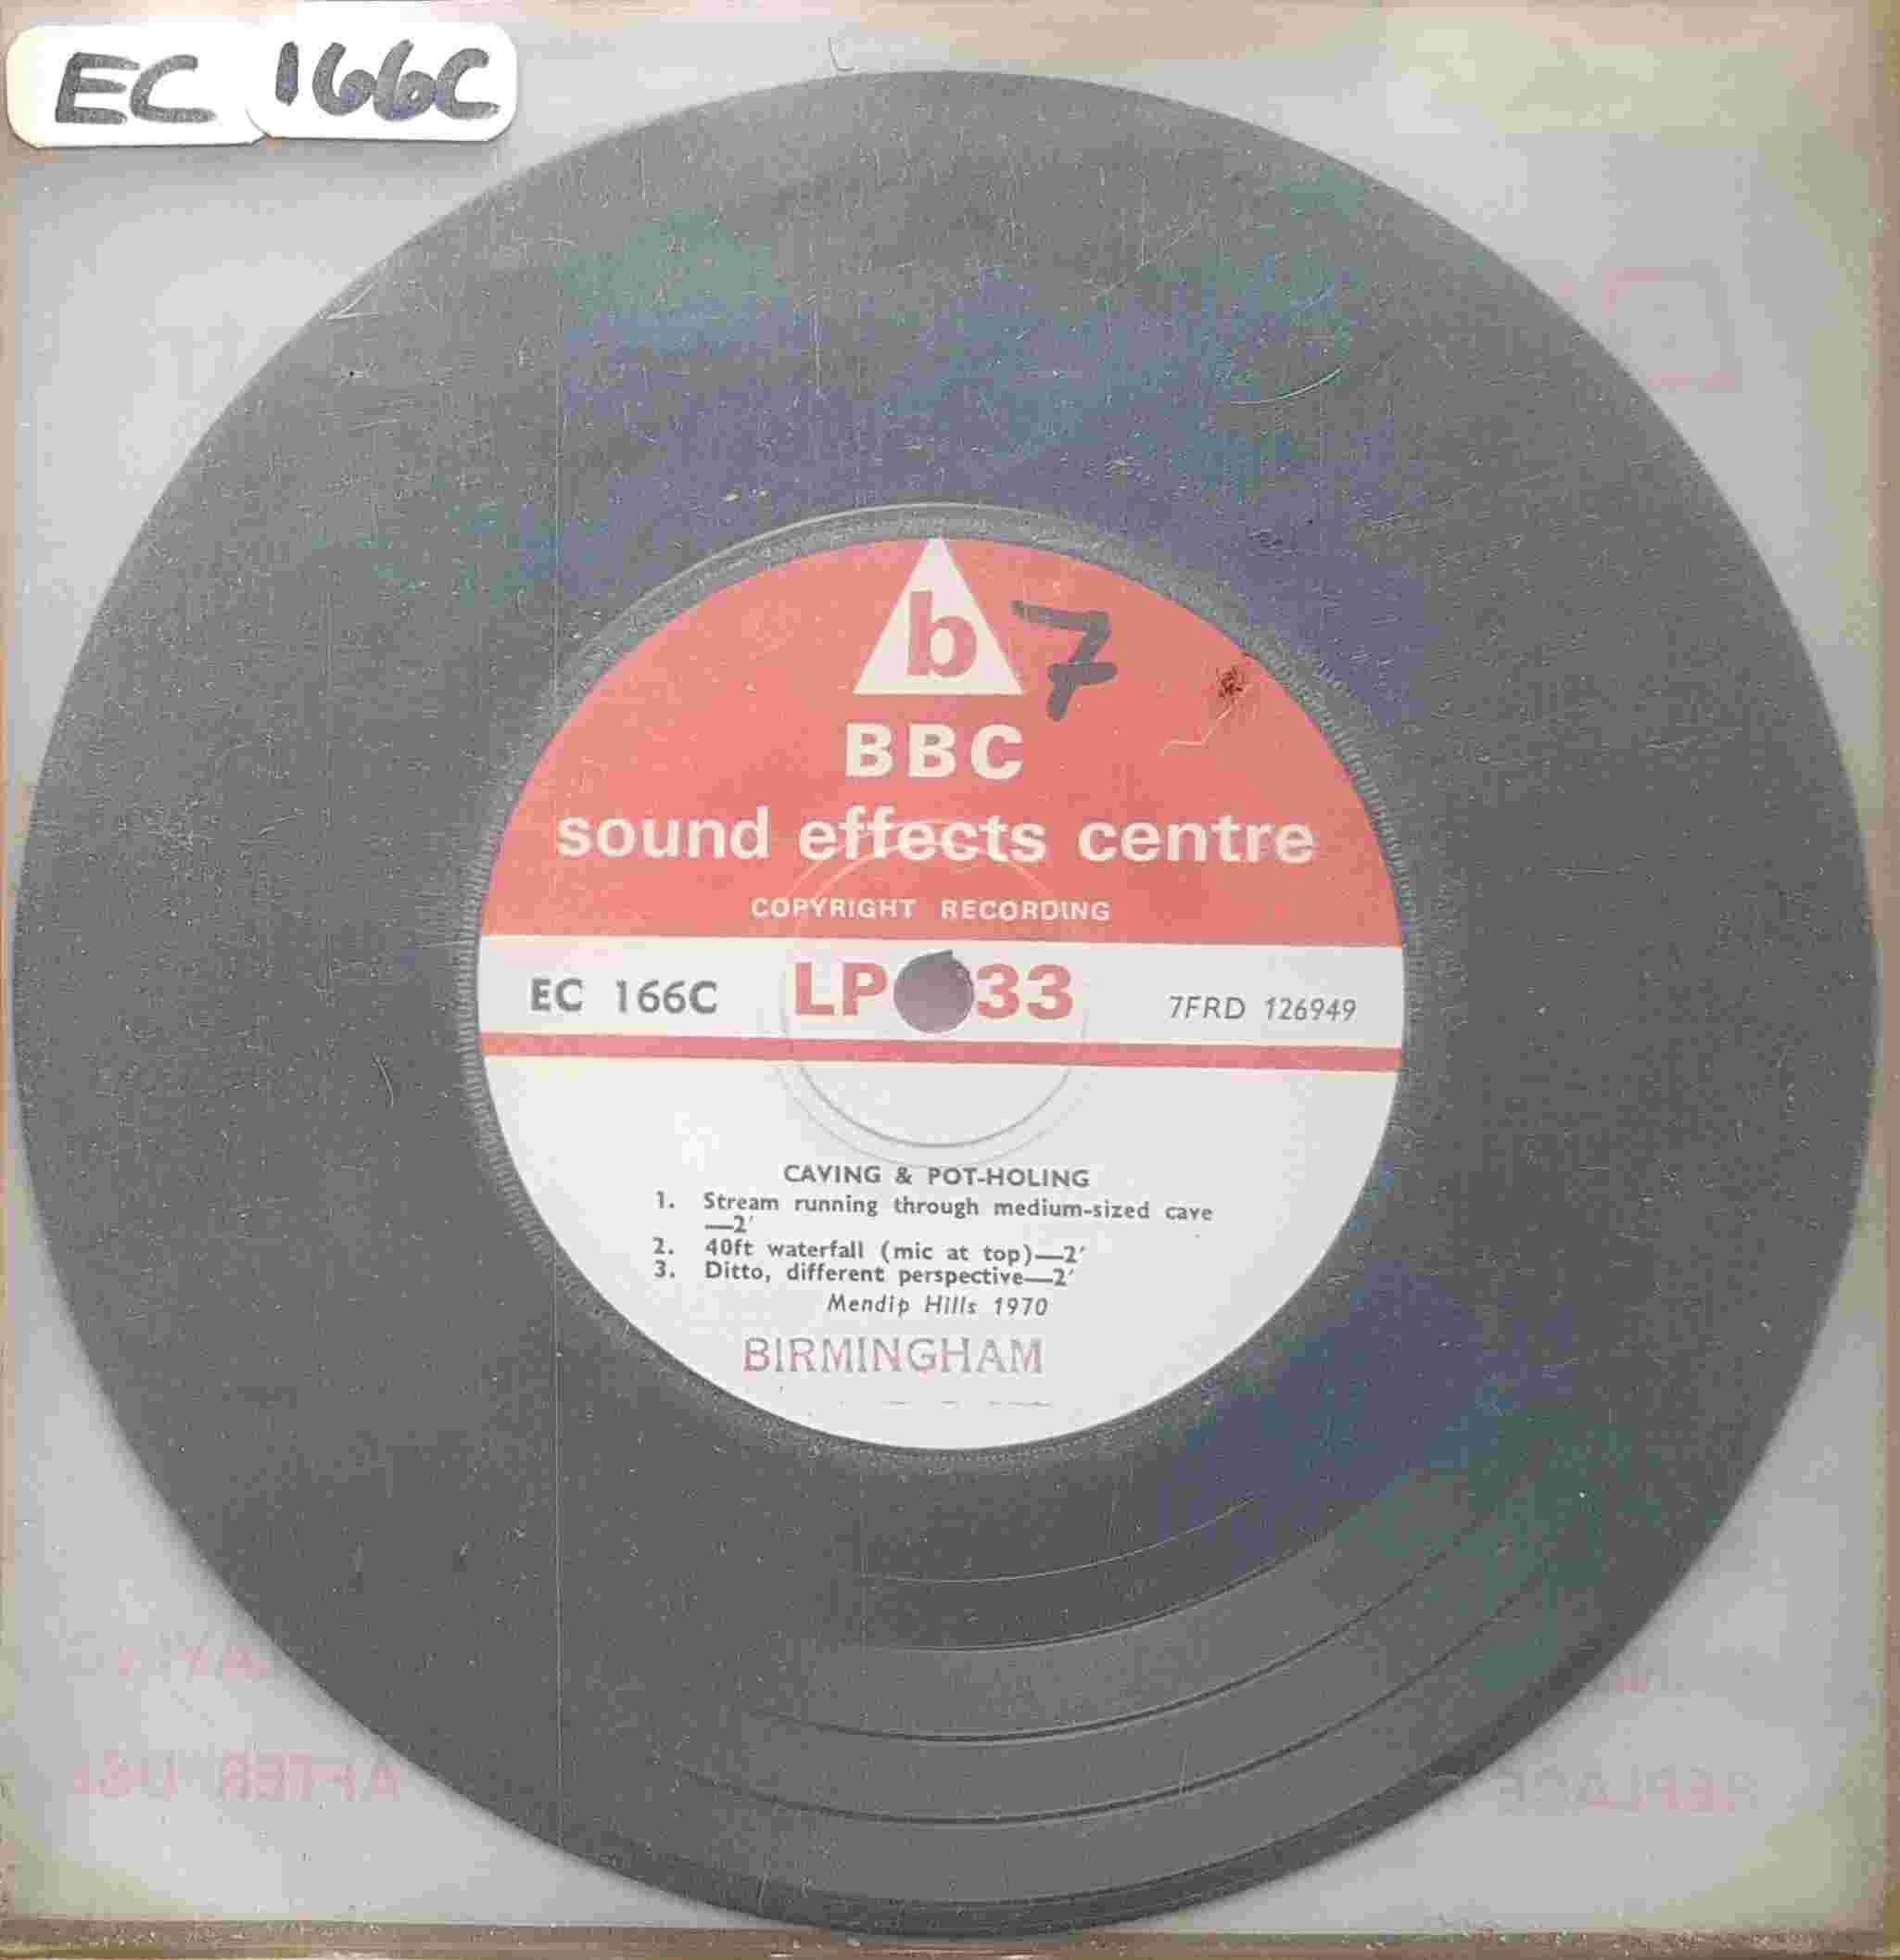 Picture of EC 166C Caving & pot-holing by artist Not registered from the BBC records and Tapes library